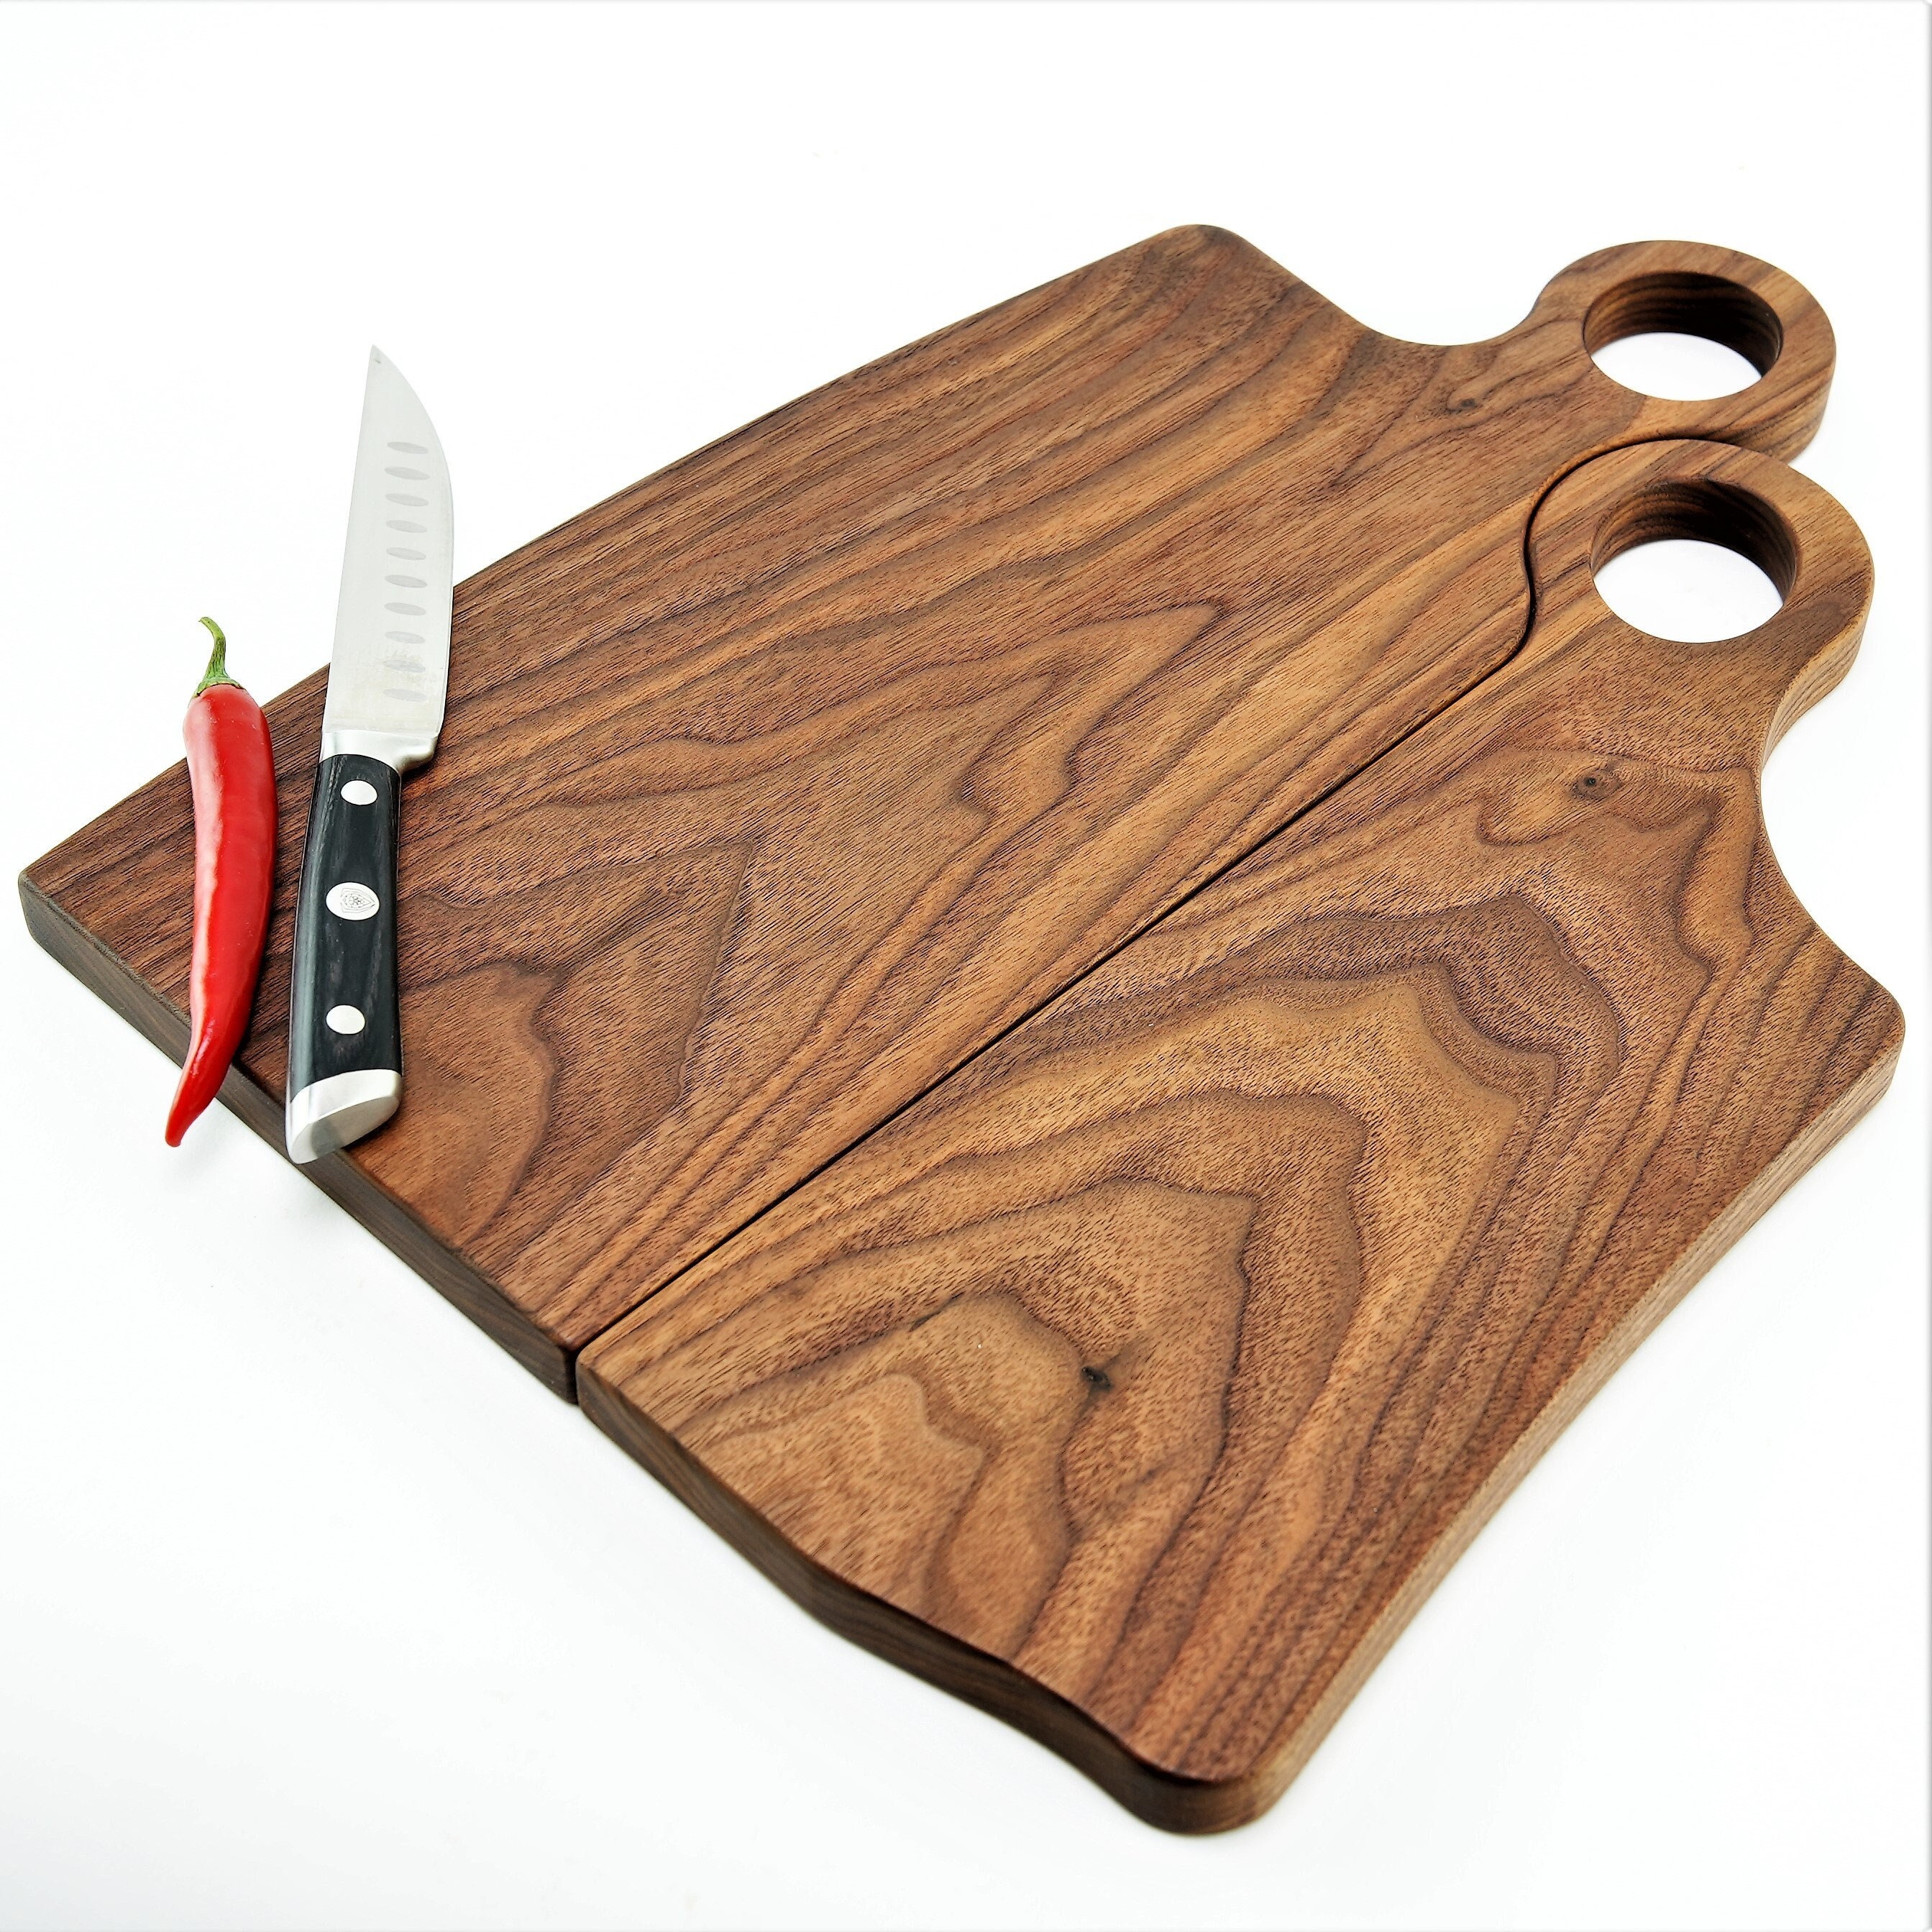 NEW!! Cutting Board & Knife Set by OTOTO - Wooden Cutting Boards for  Kitchen - Housewarming Gift, Small Cutting Board Wood, Funny Kitchen  Gadgets